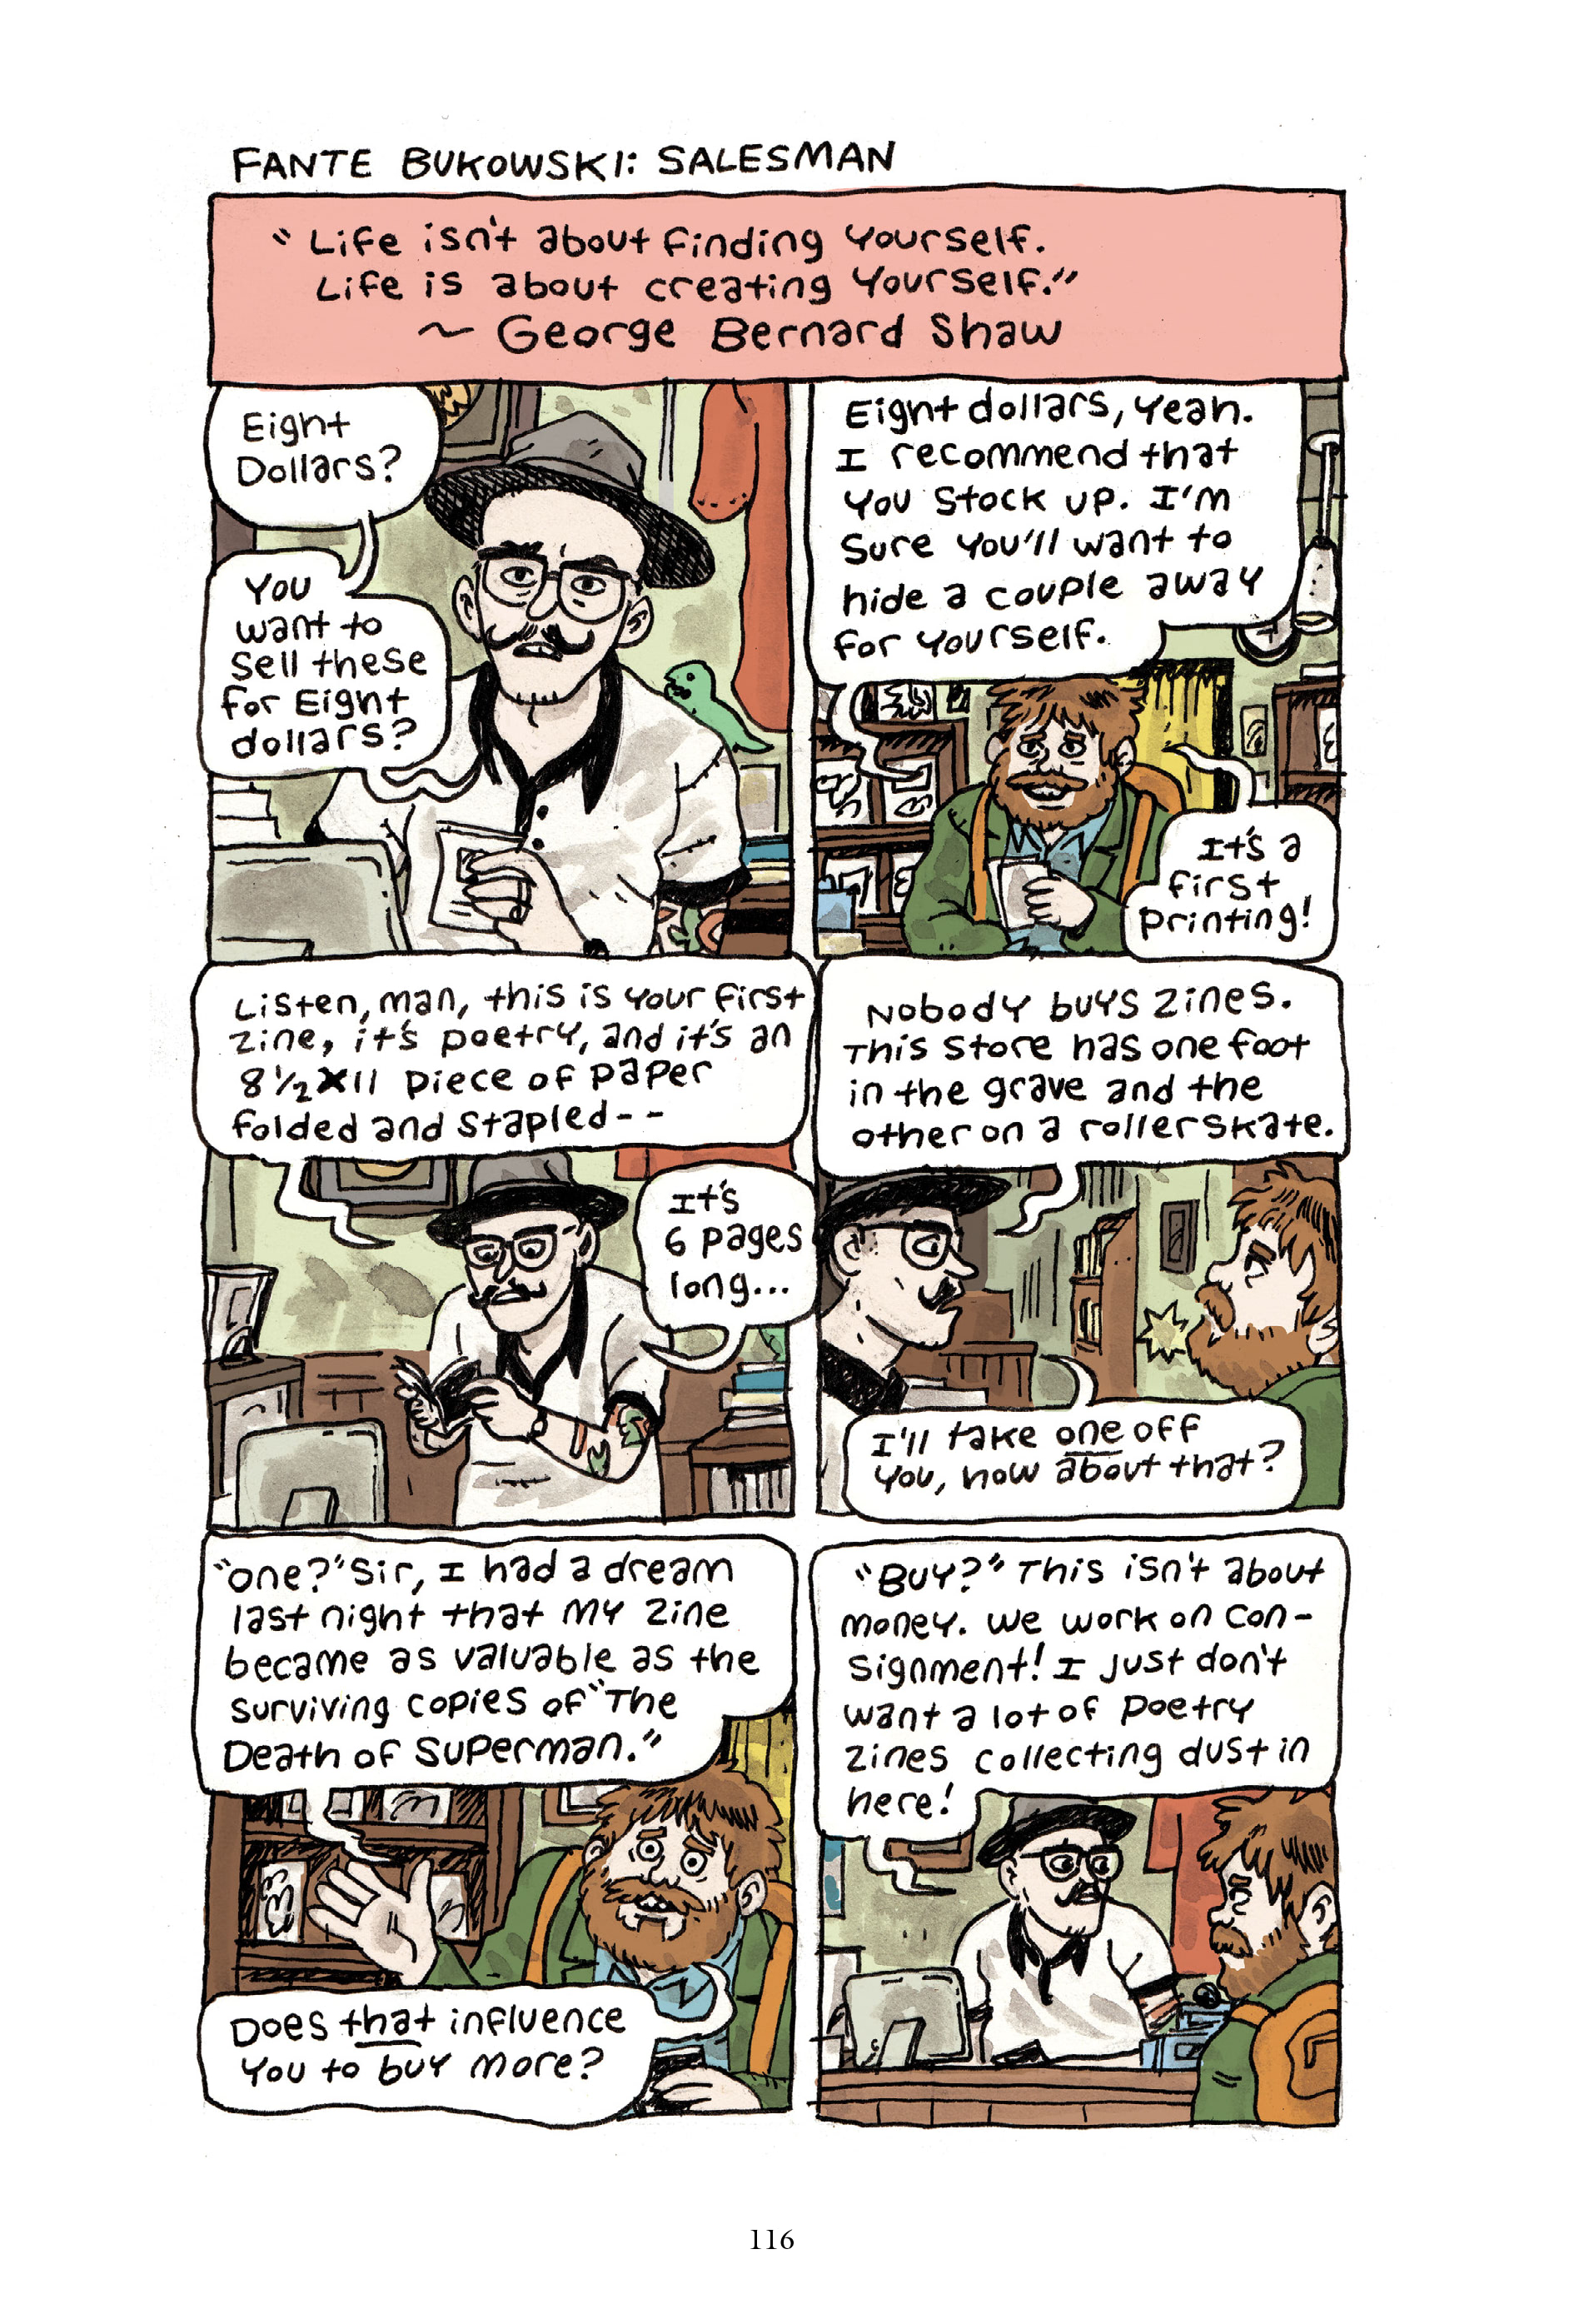 Read online The Complete Works of Fante Bukowski comic -  Issue # TPB (Part 2) - 14